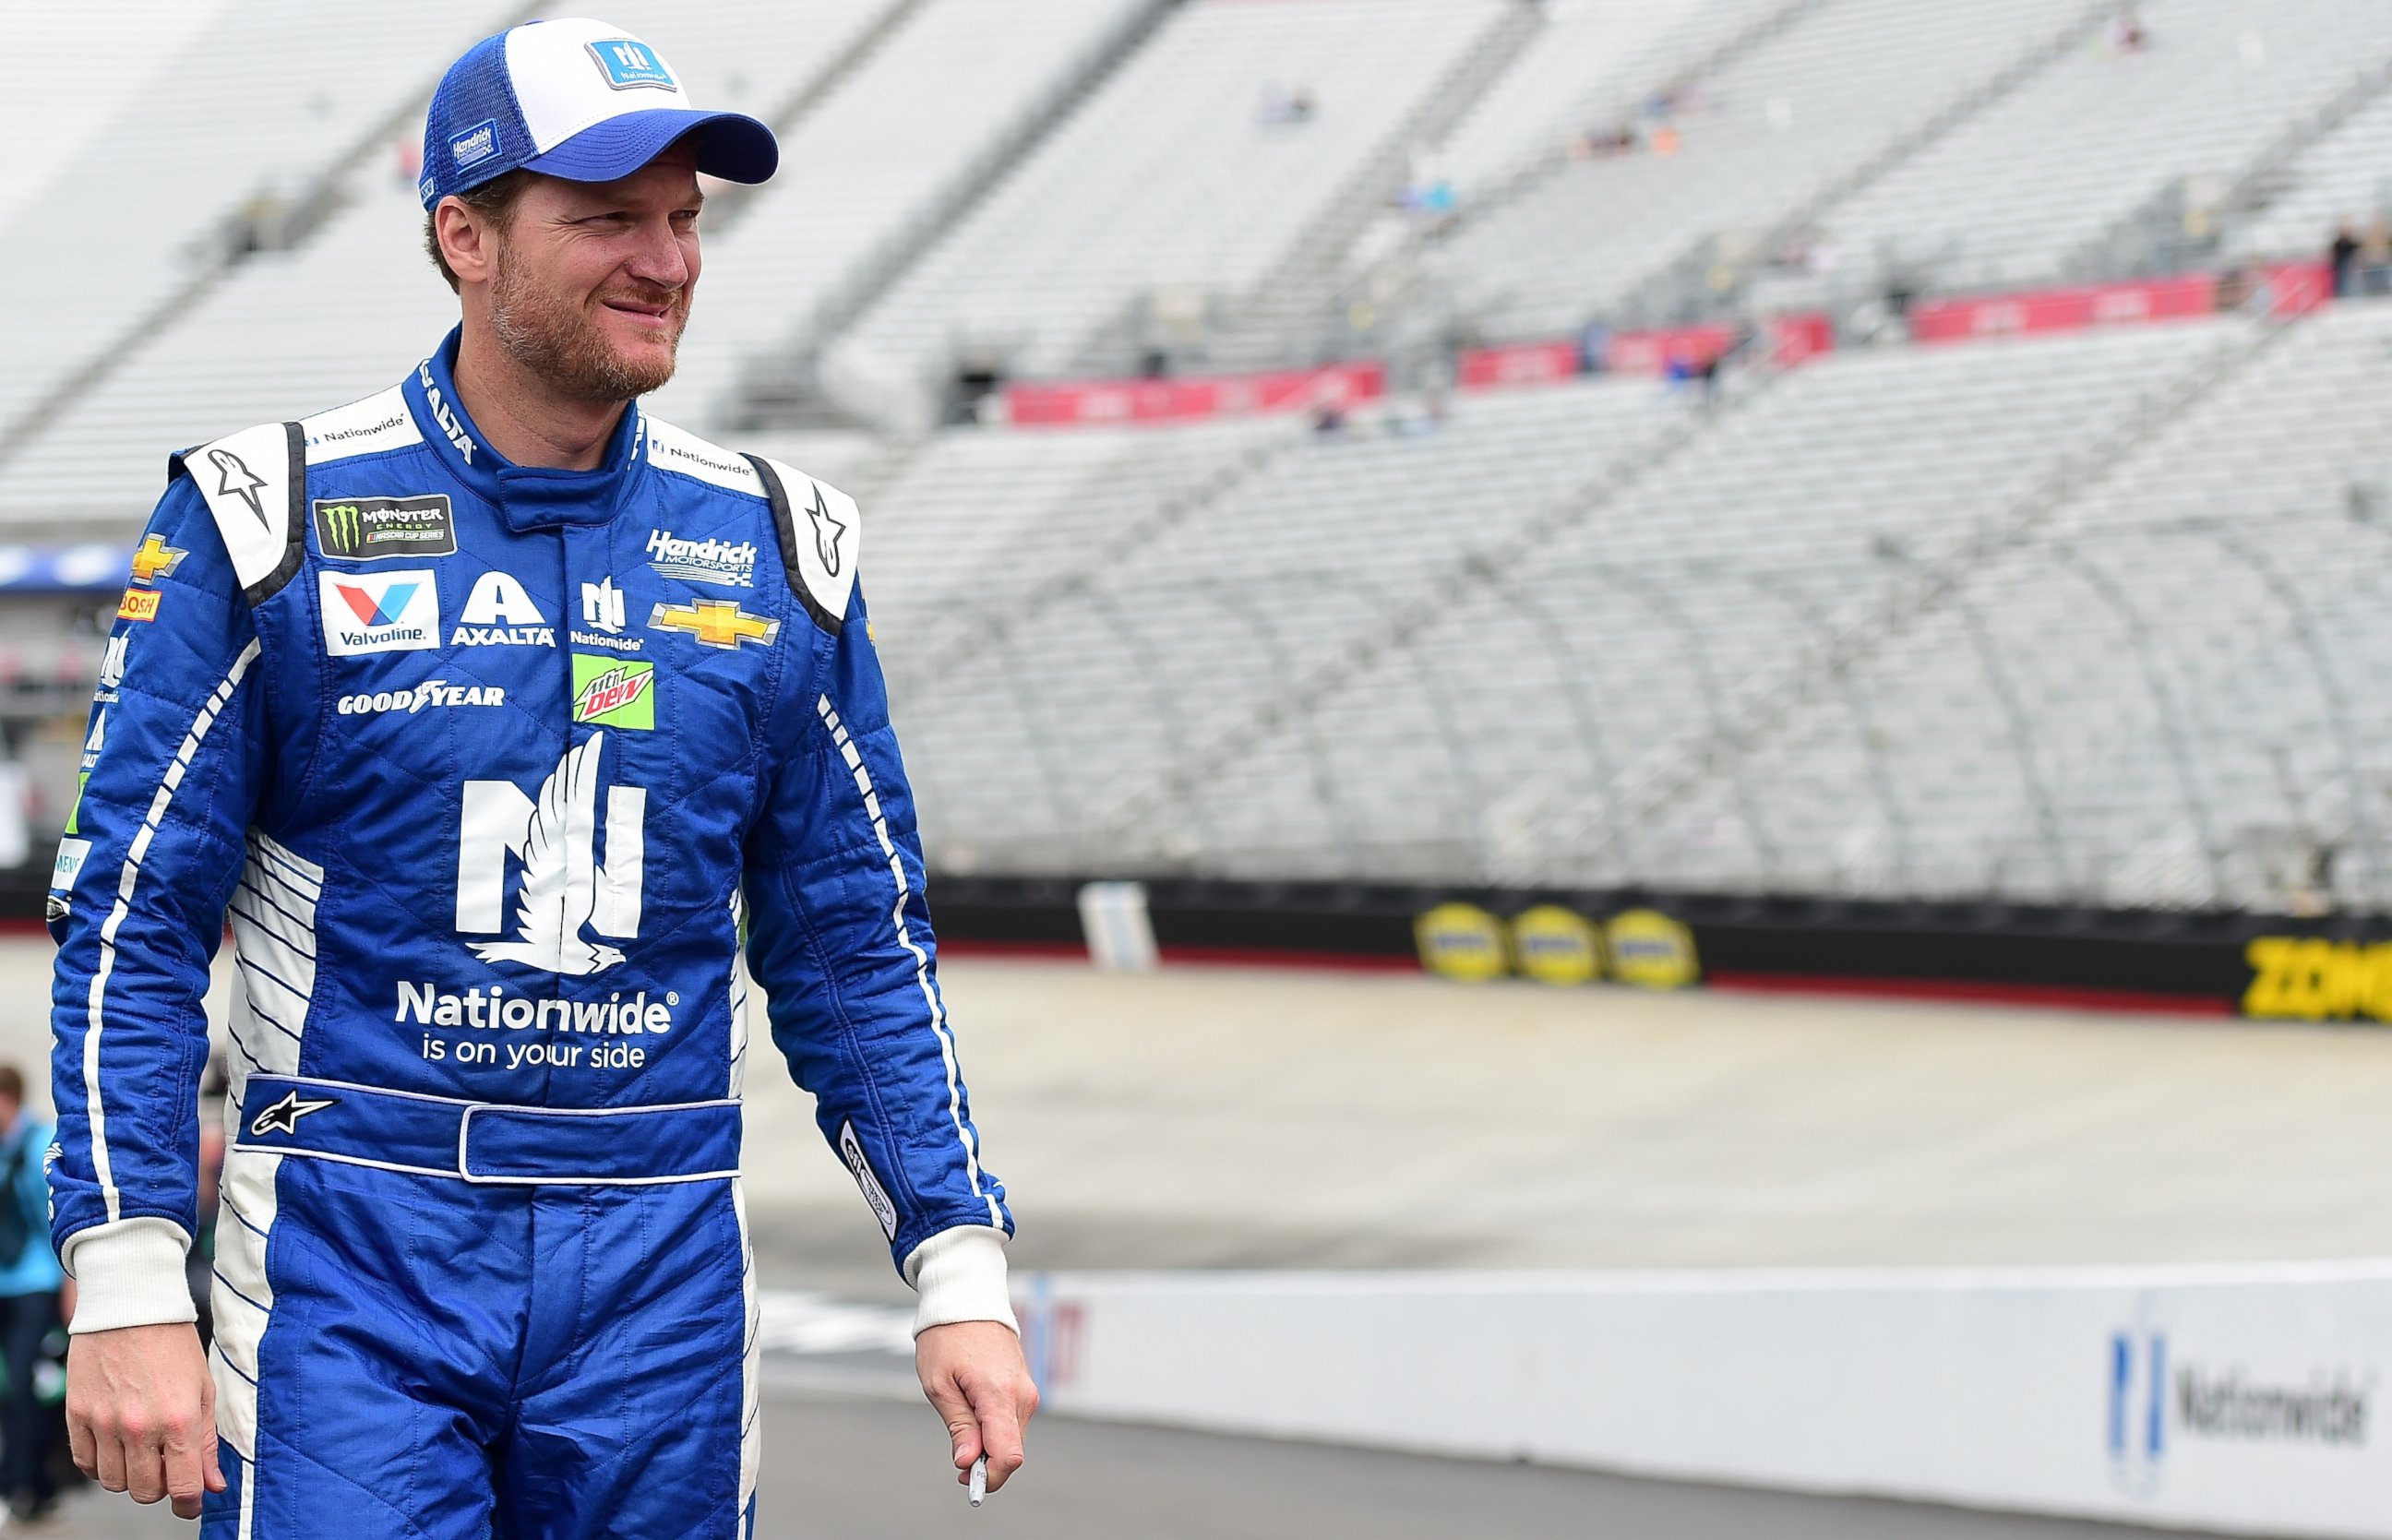 PHOTO: Dale Earnhardt Jr., driver of the #88 Nationwide Chevrolet, walks through the garage area during practice for the Monster Energy NASCAR Cup Series Food City 500 at Bristol Motor Speedway, April 22, 2017, in Bristol, Tennessee.  